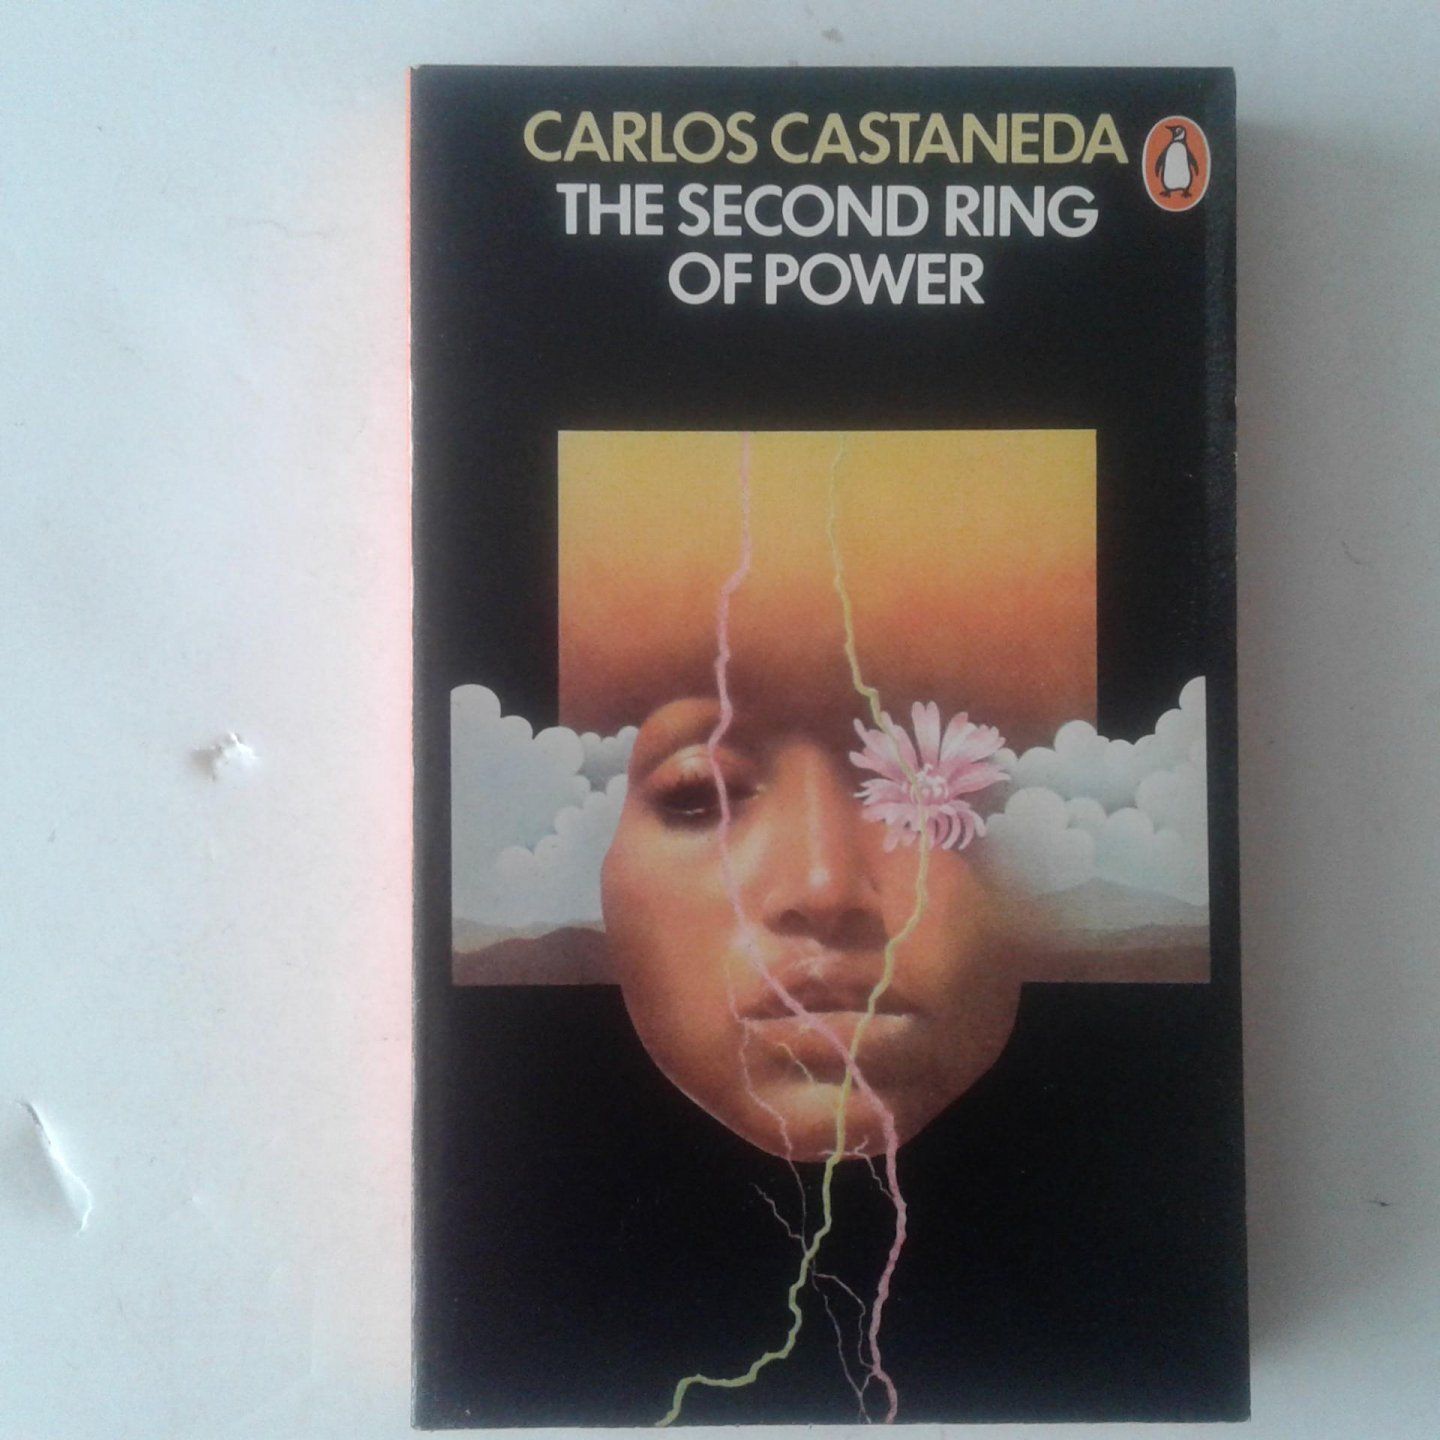 Castaneda, Carlos - The Second Ring of Power